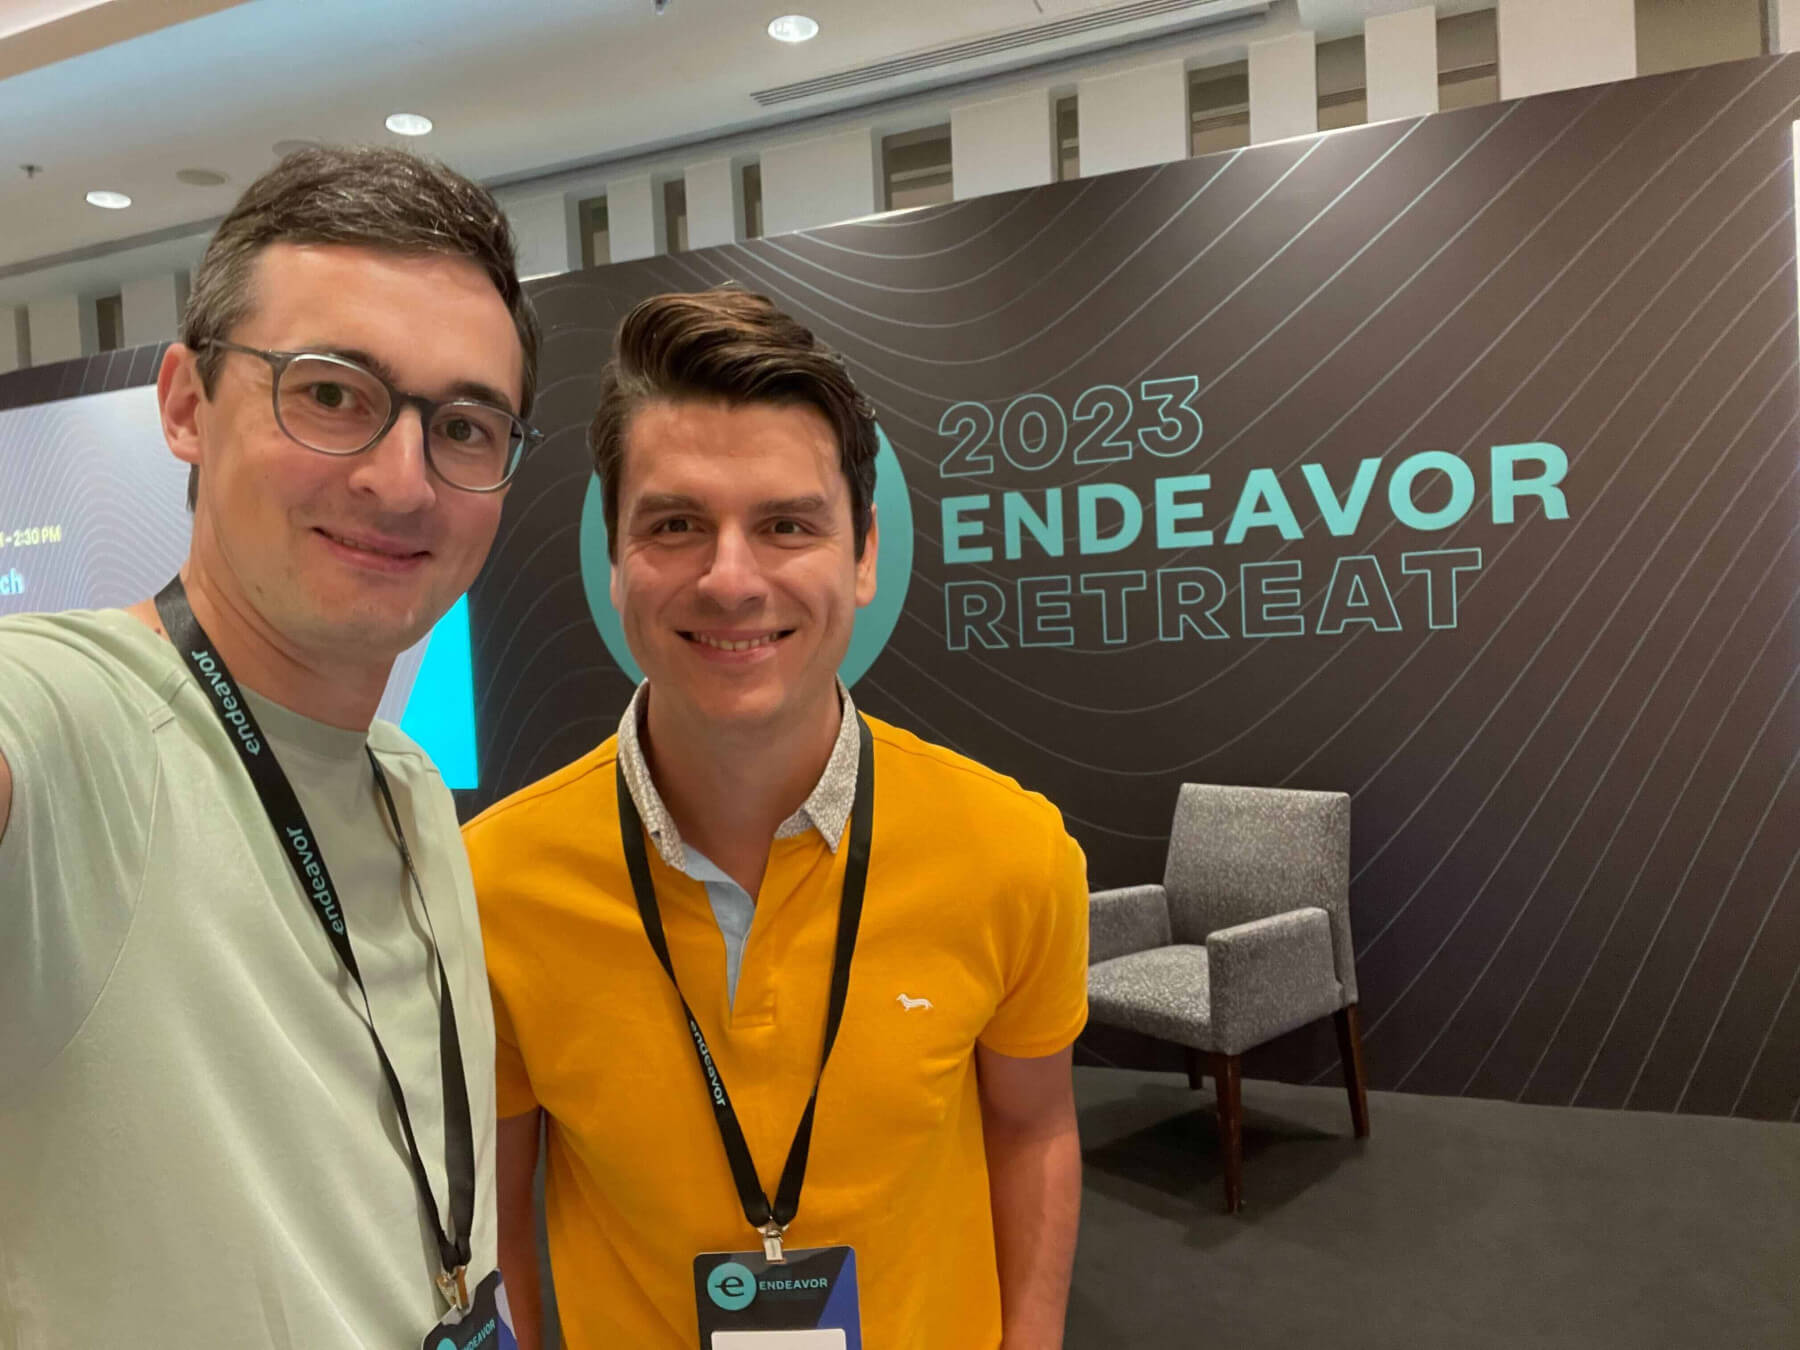 TransferGo founders become the first Lithuanians to be invited to the global entrepreneur network, Endeavor